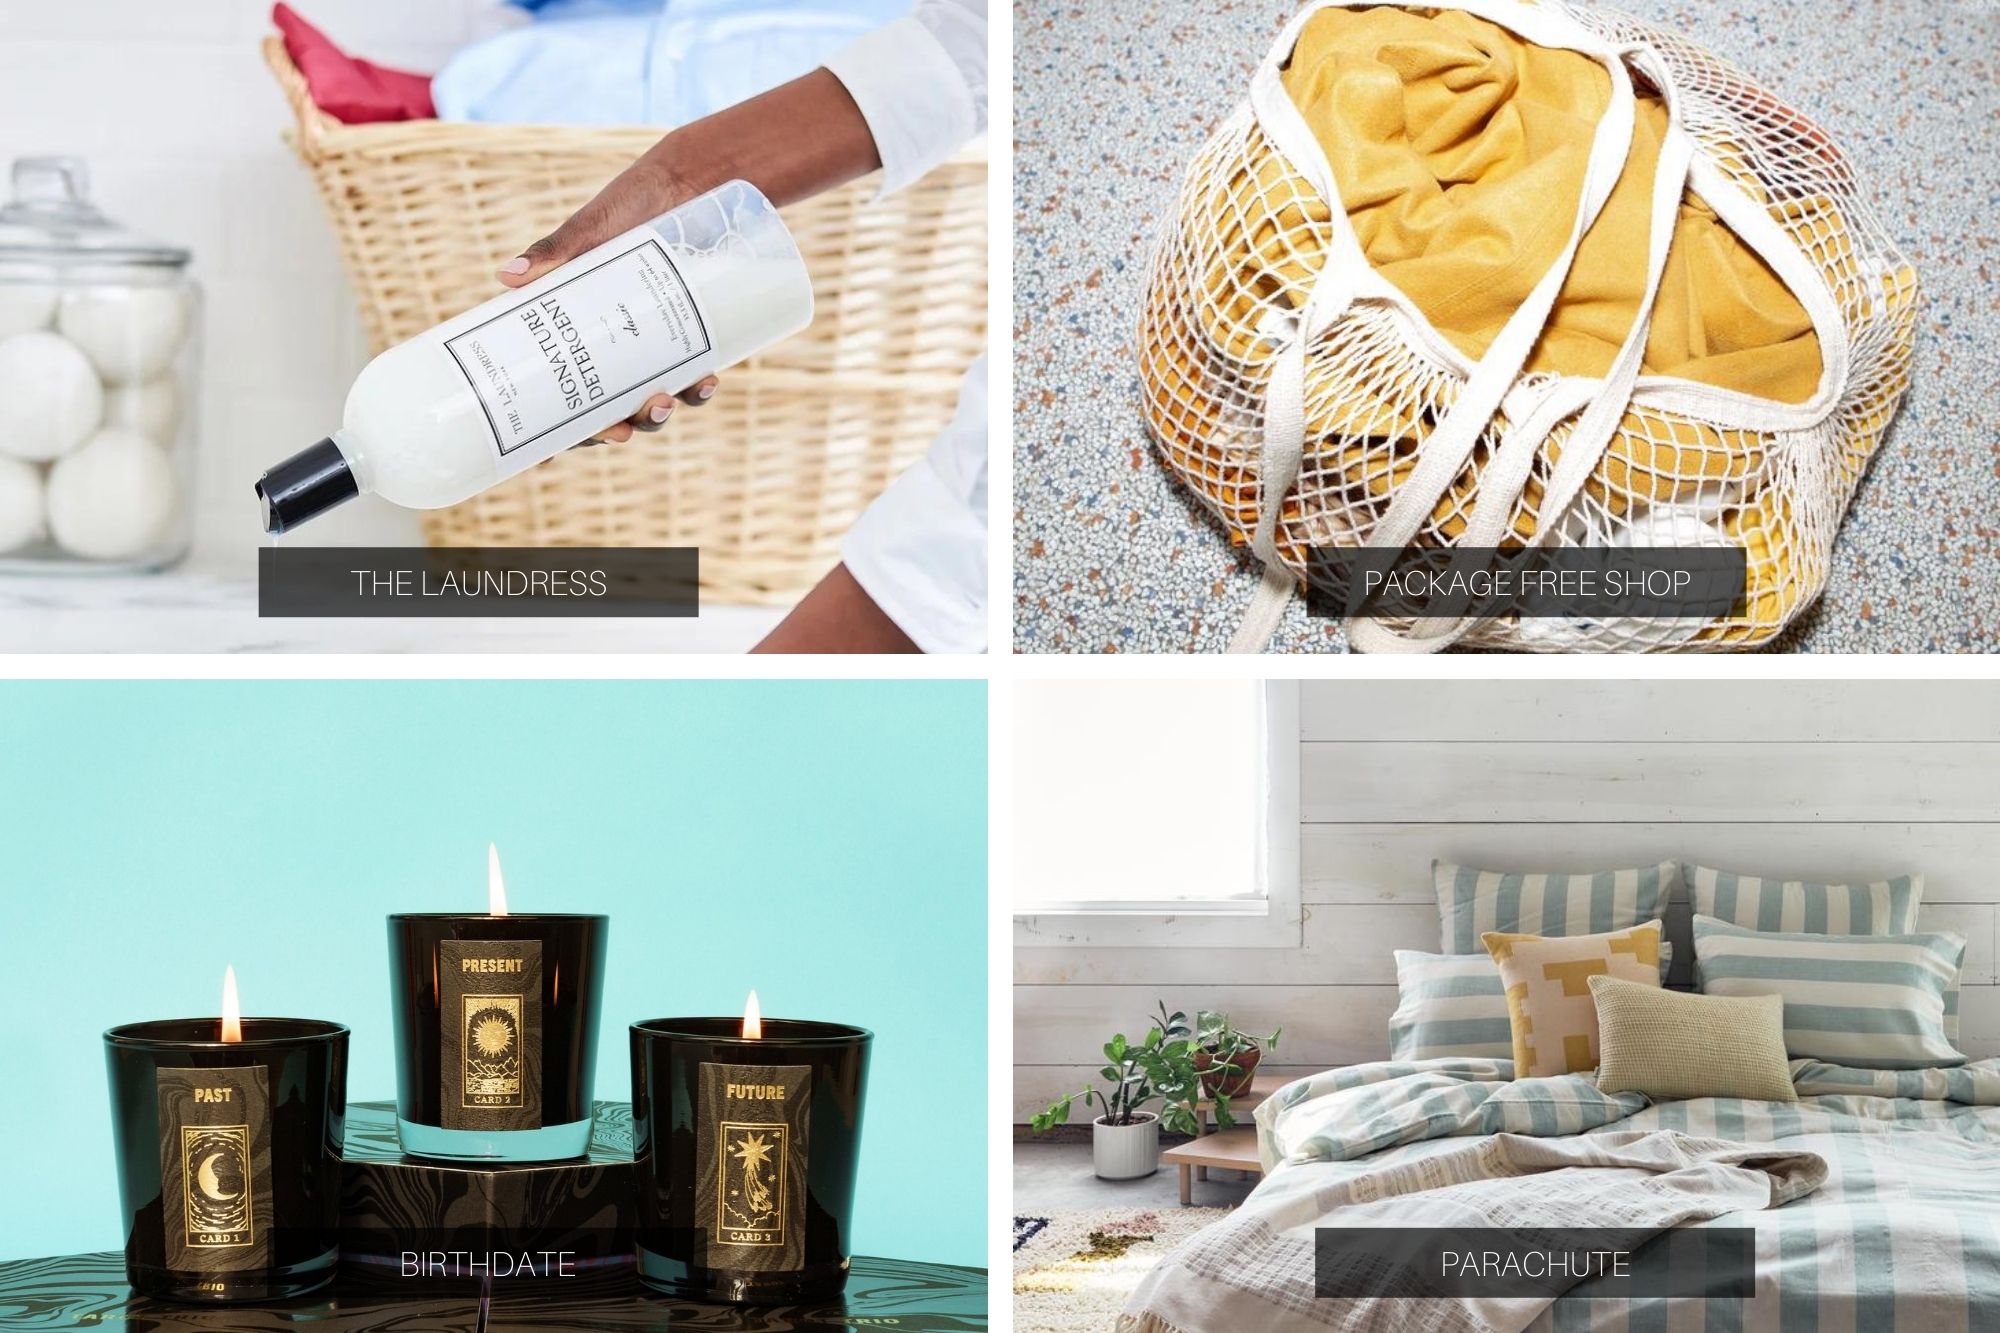 Collage of home images: laundry detergent, a mesh bag, a cozy bed with lots of blankets, and a trio of black candles